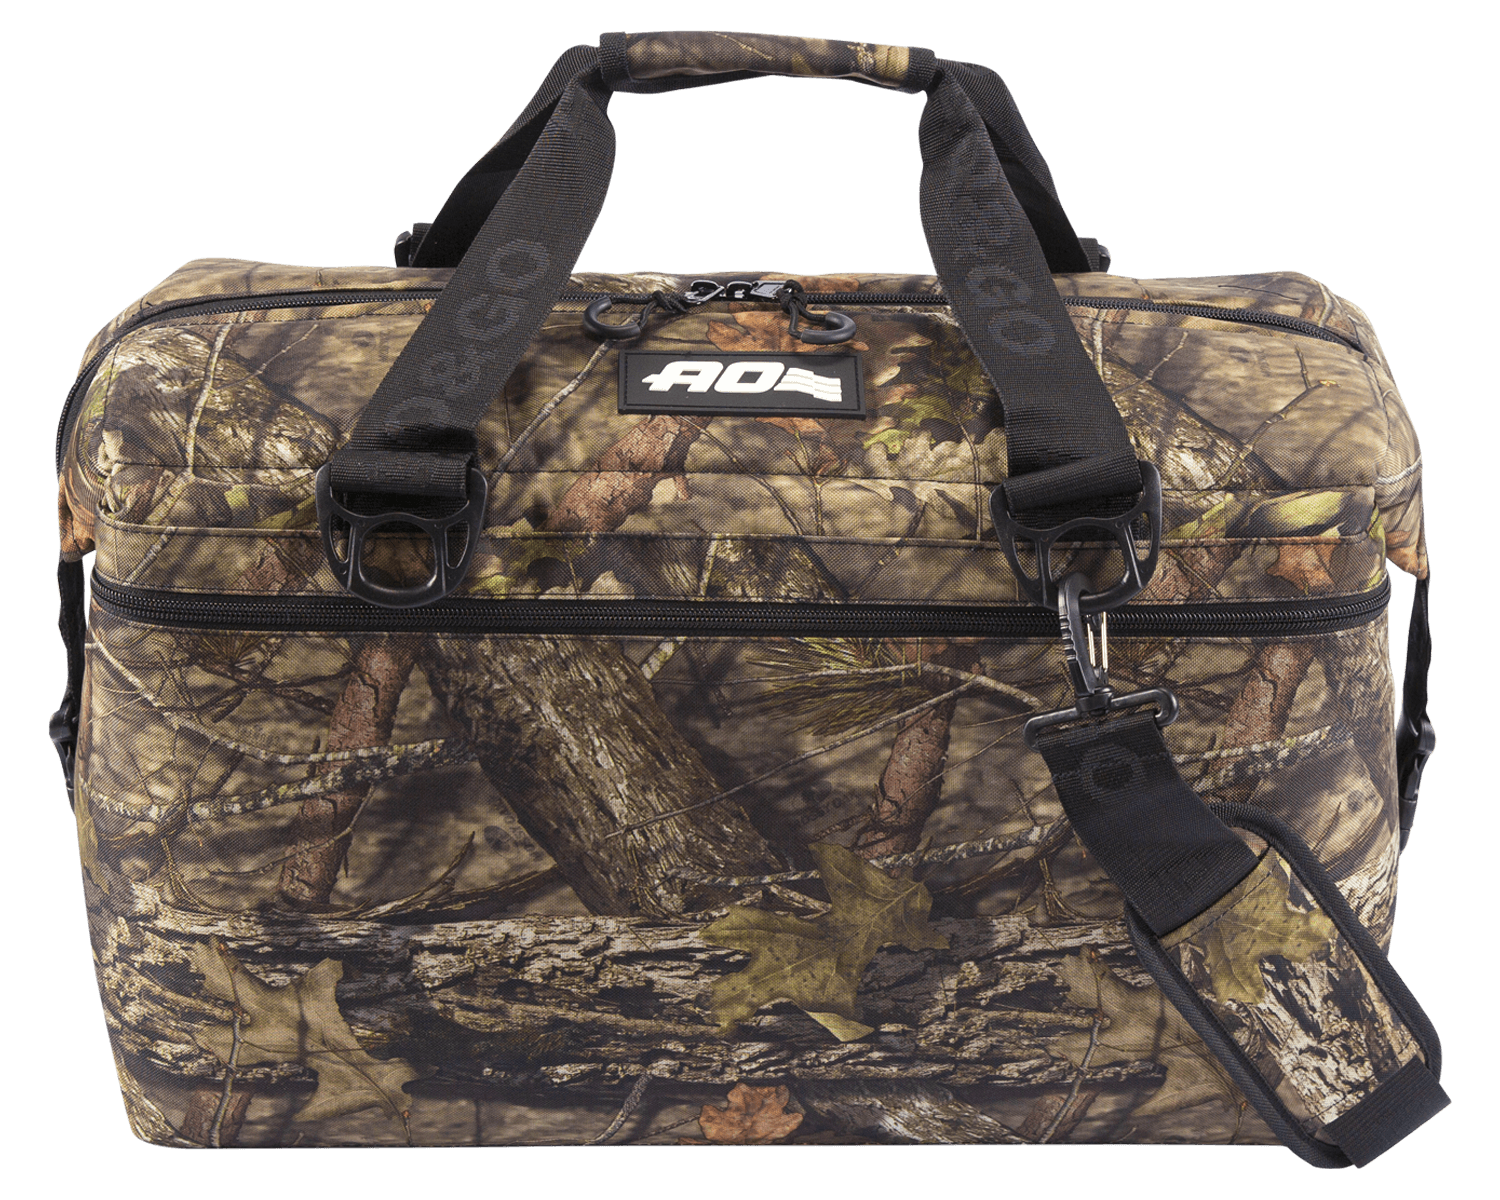 Mossy Oak Break-Up Country Series 48 Pack Cooler – AO Coolers